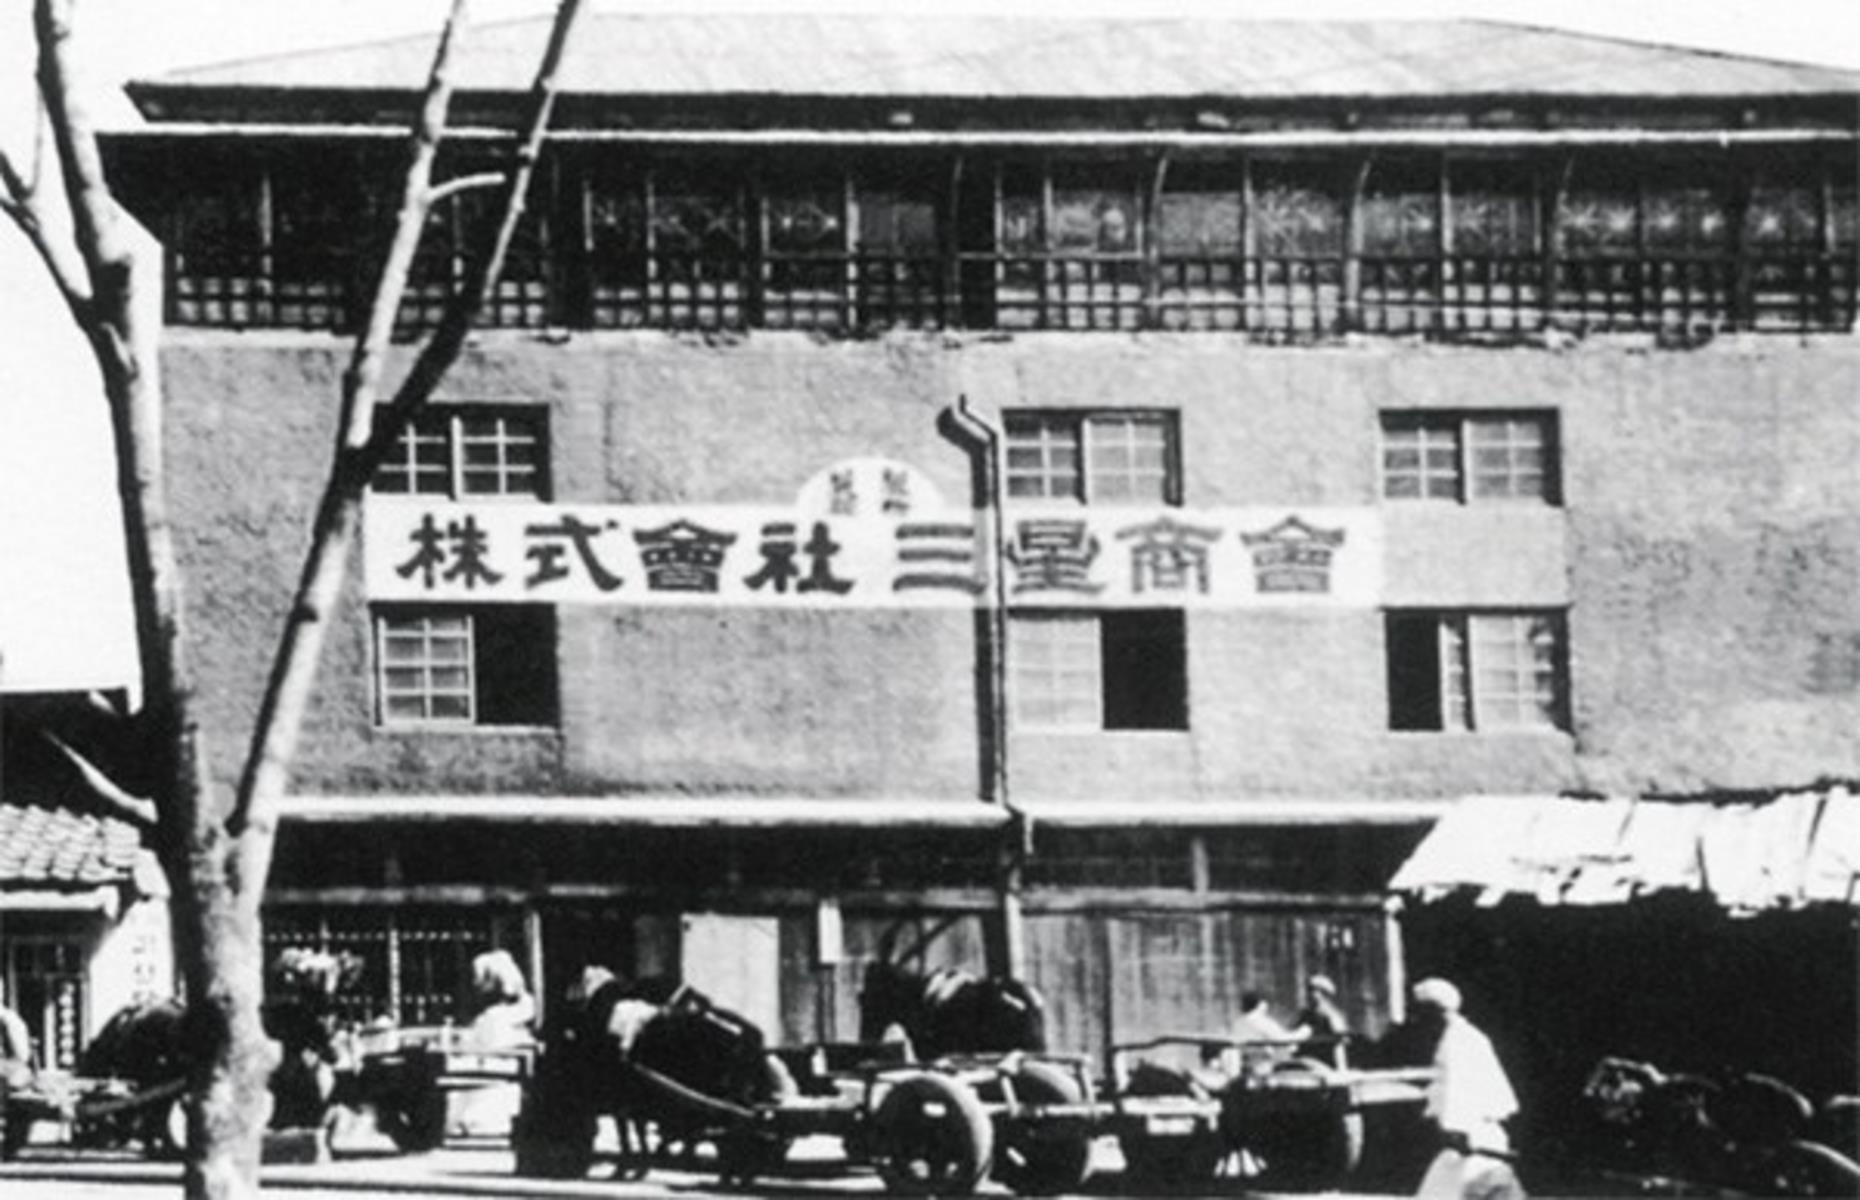 Shot of the Samsung trading company and grocery store in 1938